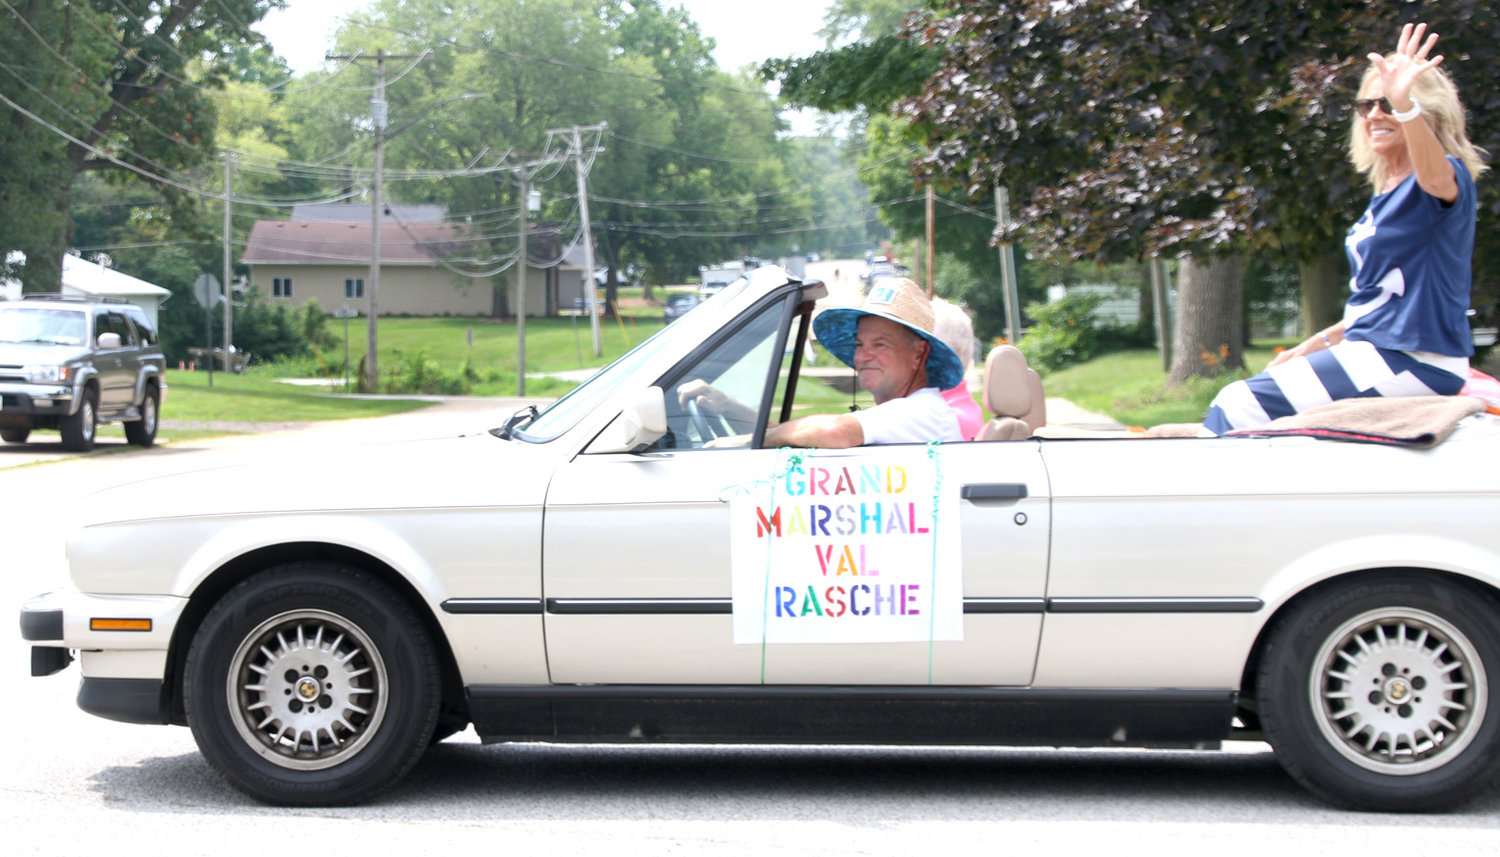 Grand Marshal Val Rasche waves to the crowd.